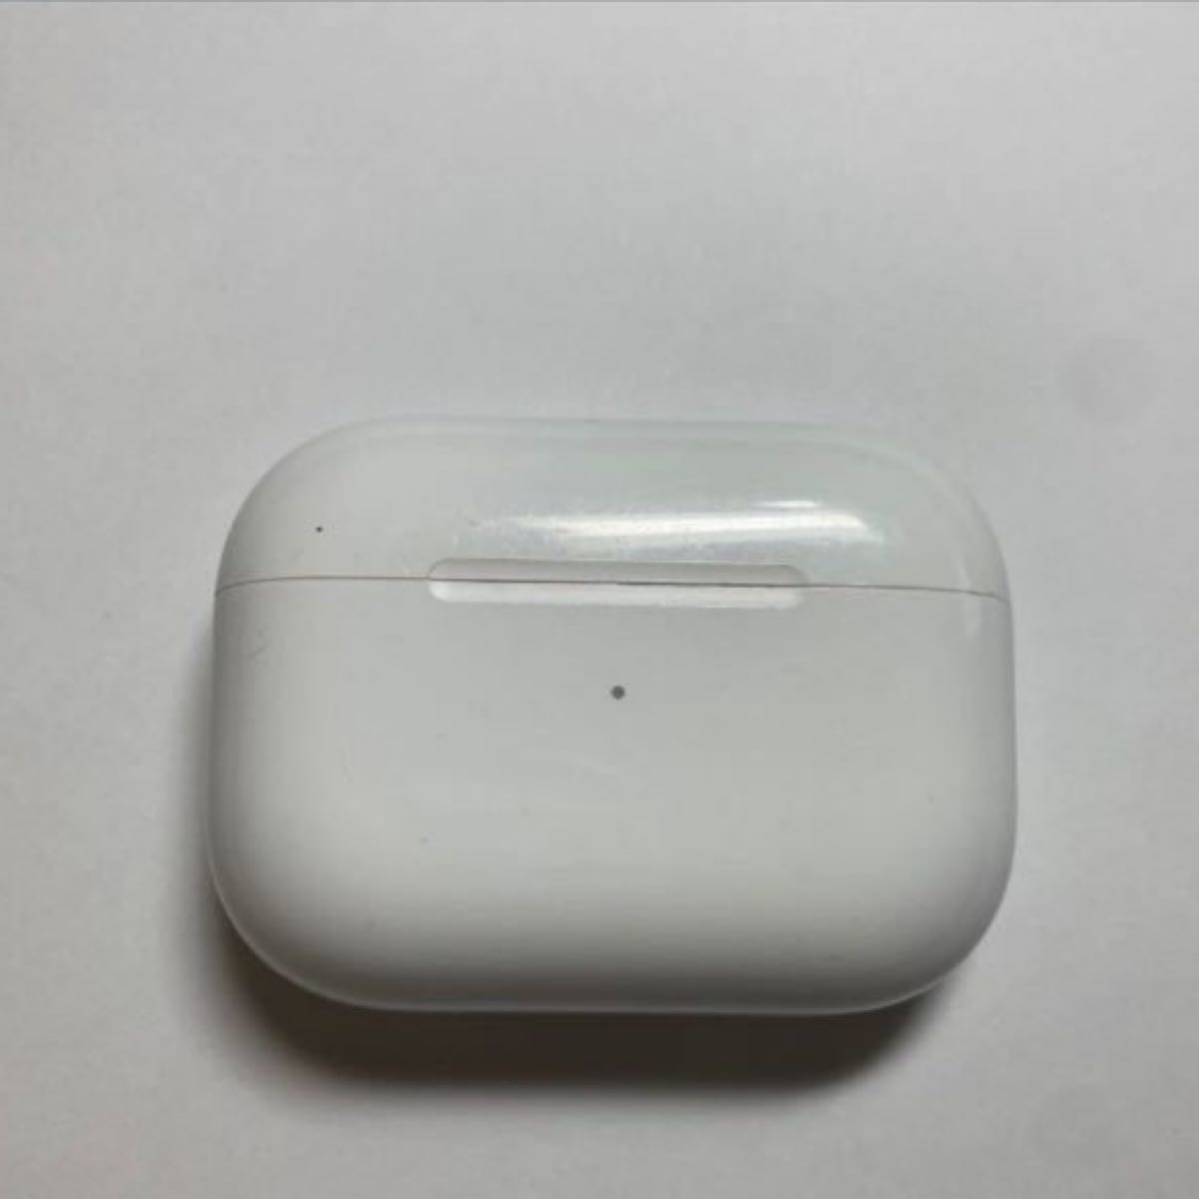 AirPods Pro 充電ケースのみ　正規品